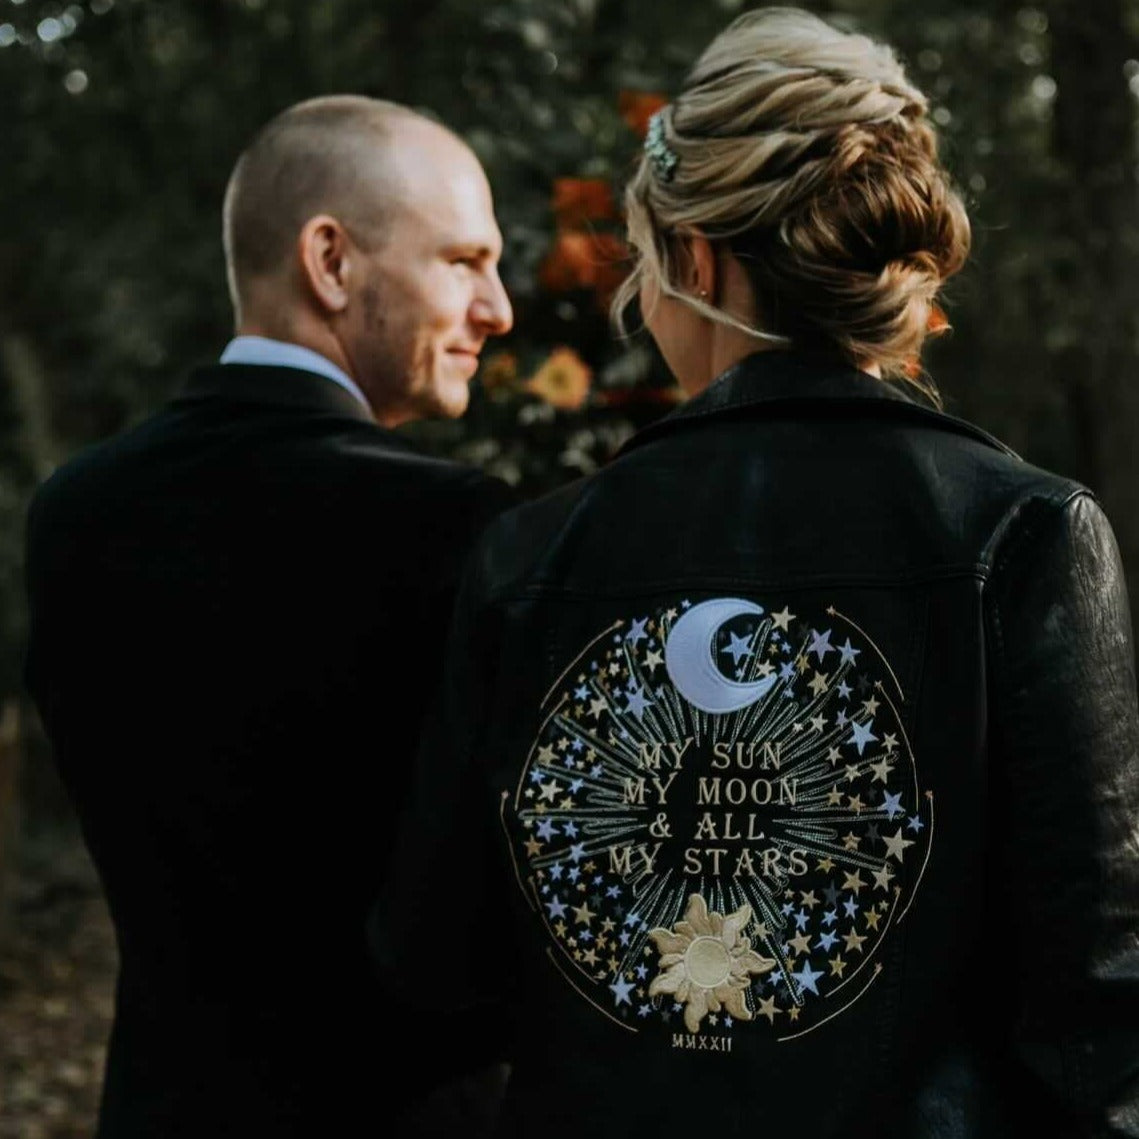 Black wedding jacket with a poetic twist – 'My Sun, My Moon & All My Stars' – an exquisite addition to your bridal attire